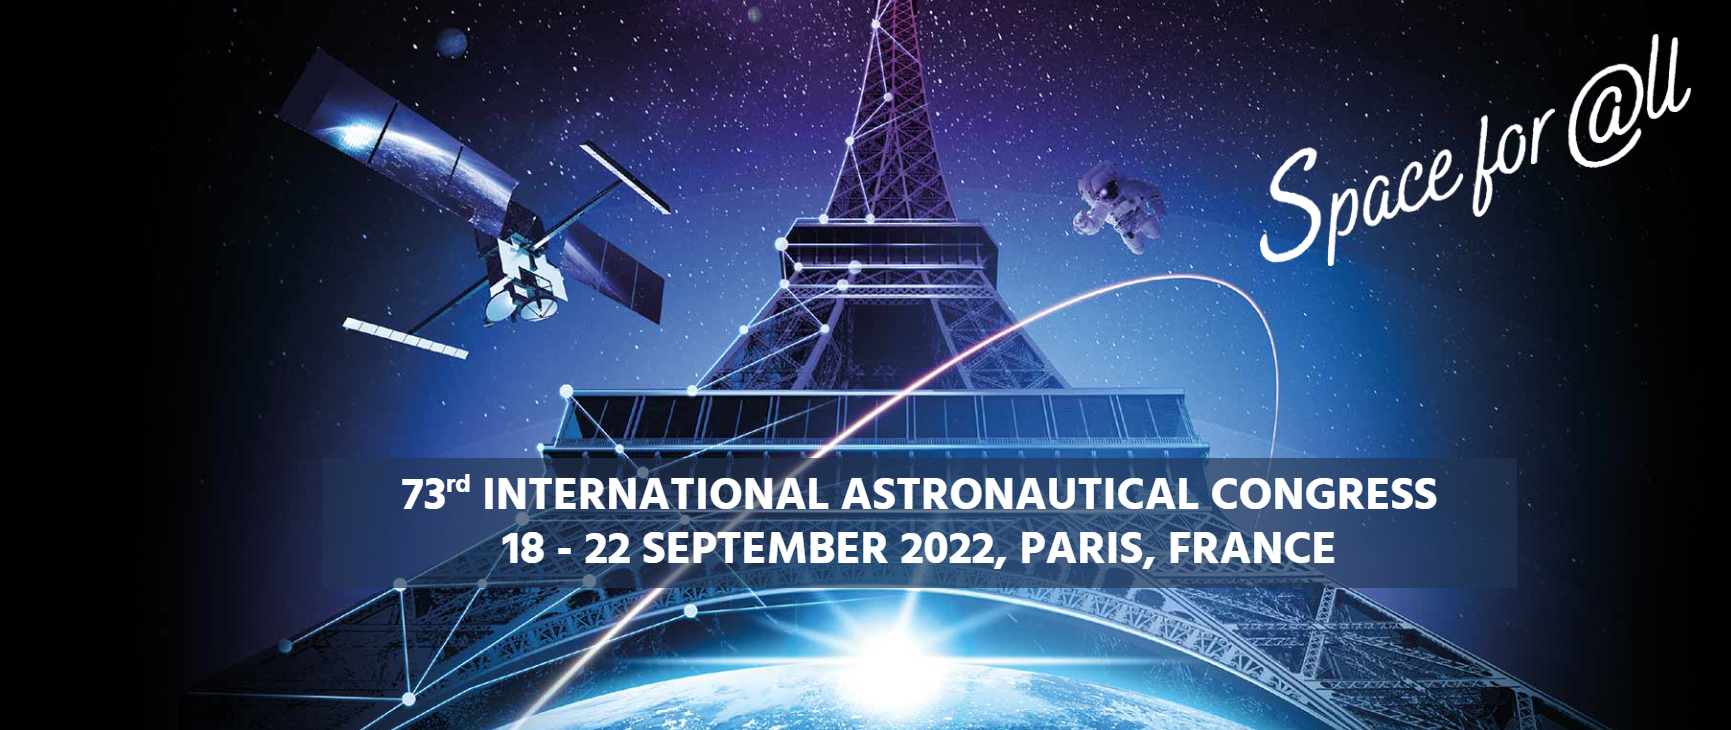 Space Renaissance has done great things at the 73rd IAF Congress, in Paris!